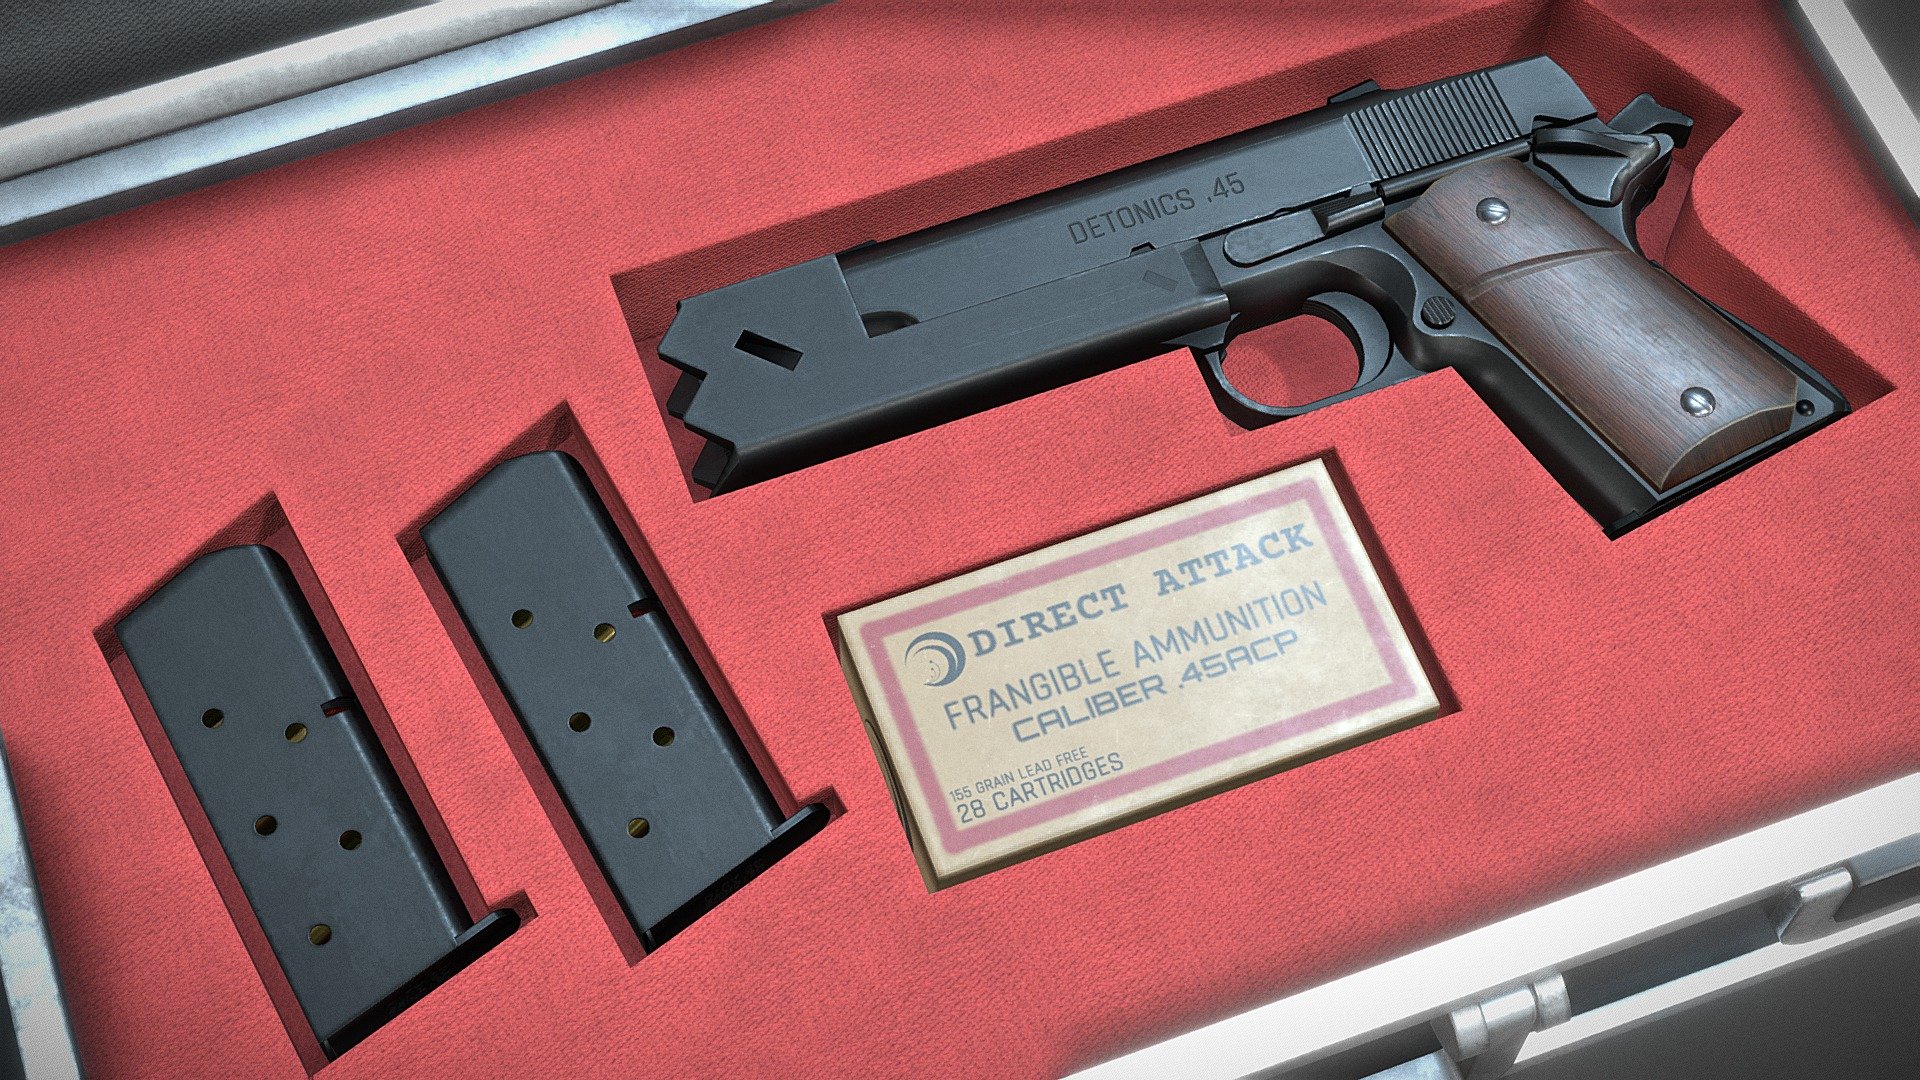 A custom Detonics Combat Master 1911 fitted with a compensator, used by Nishikigi Chisato in Lycoris Recoil. This is my 3D rendition of the gun plus the weapon case seen in Episode 2. 

The Detonics Combat Master is a sub-compact variant of the 1911 family designed specifically to target individuals looking for a conceal carry handgun. Chisato's Detonics features a completely fictional/custom compensator that the animator likely took inspiration from Tokyo Marui's Striker .45 airsoft pistol. In the anime show, Chisato states that she uses &ldquo;non-lethal rubber bullets